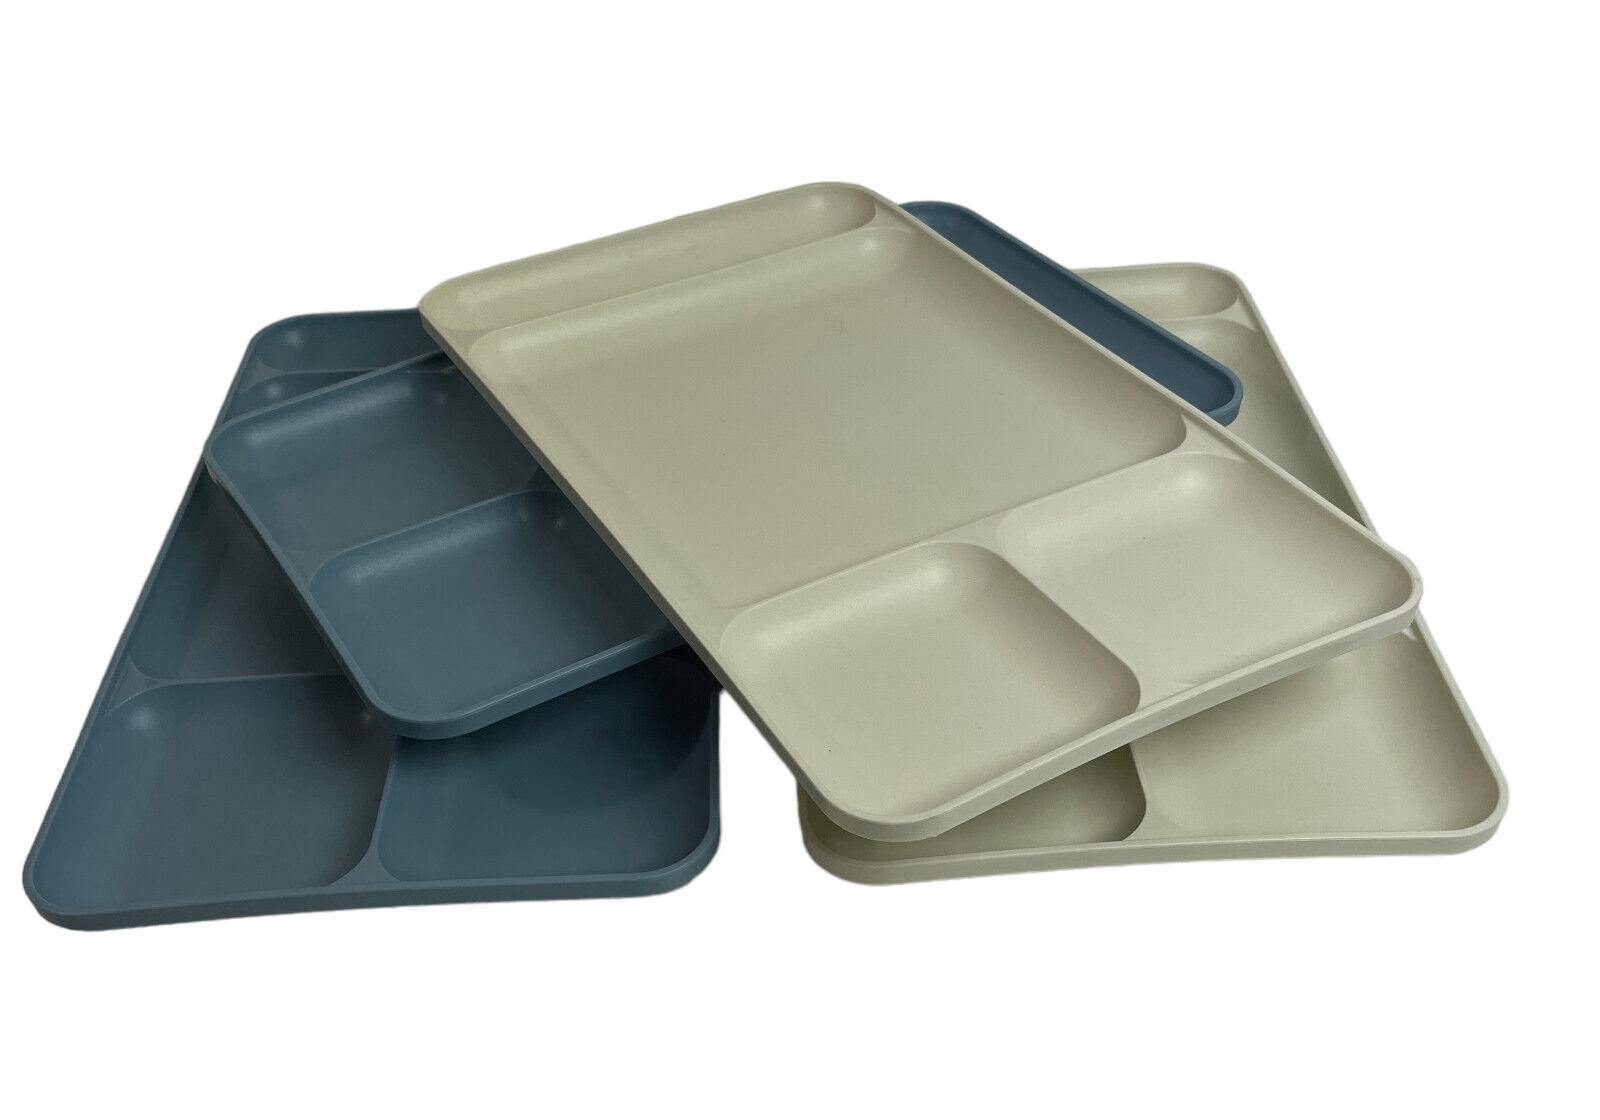 Set 0f 4 Blue & Cream Tupperware Divided Plates Lunch Trays Stackable #1535 - $17.95